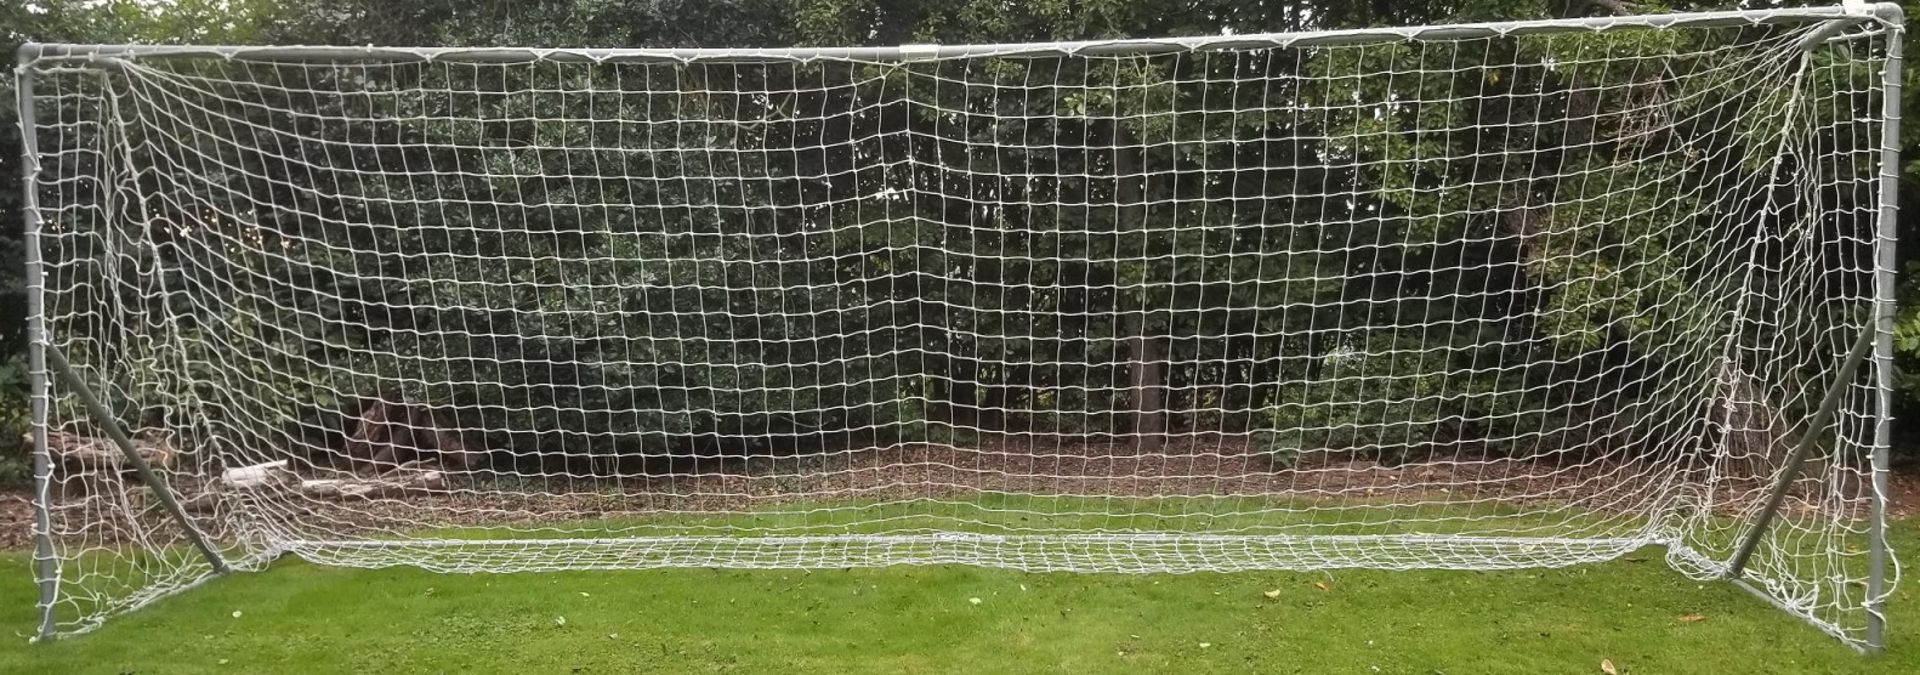 Full size heavy weight football goal 24ft x 8ft with professional net - Image 2 of 8